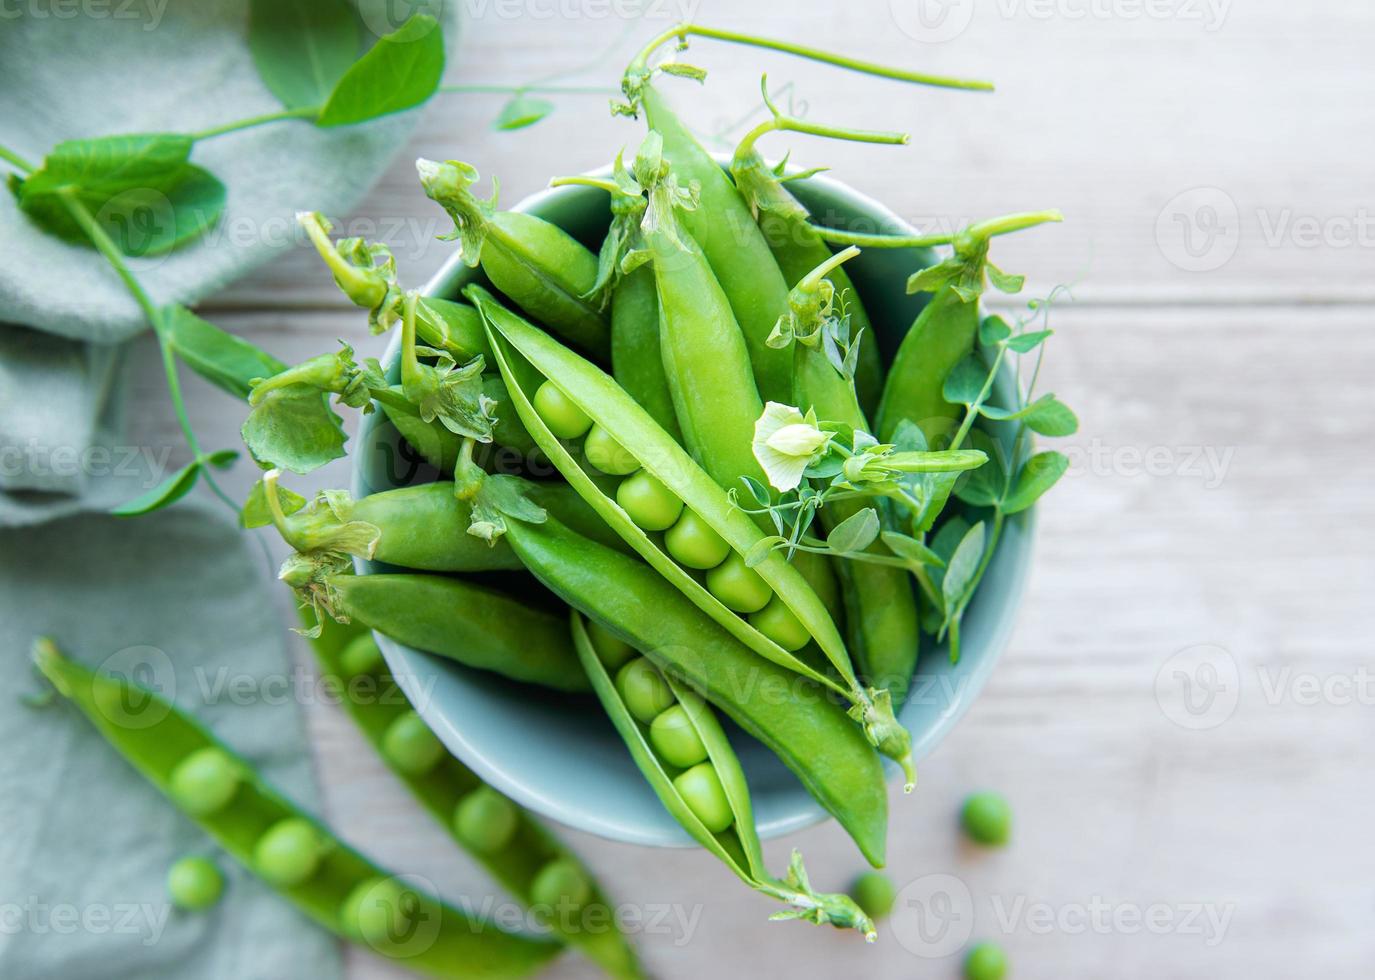 Bowl with sweet pea pods photo